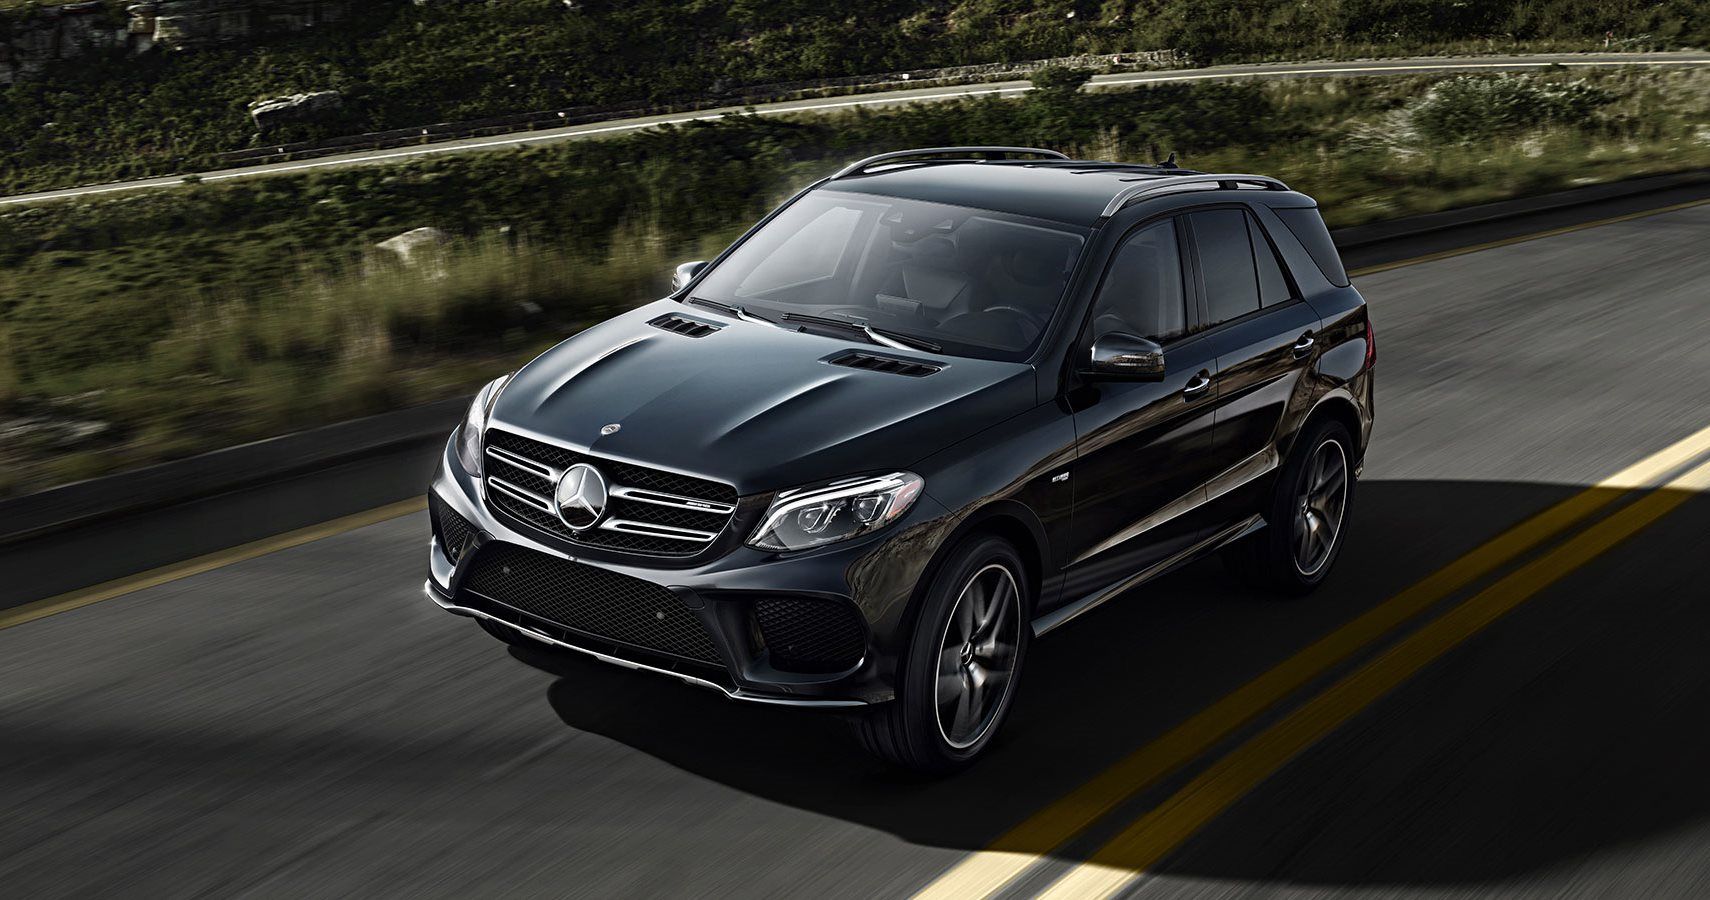 Check Out The Mercedes-Benz GLE-Class Crossover In Action